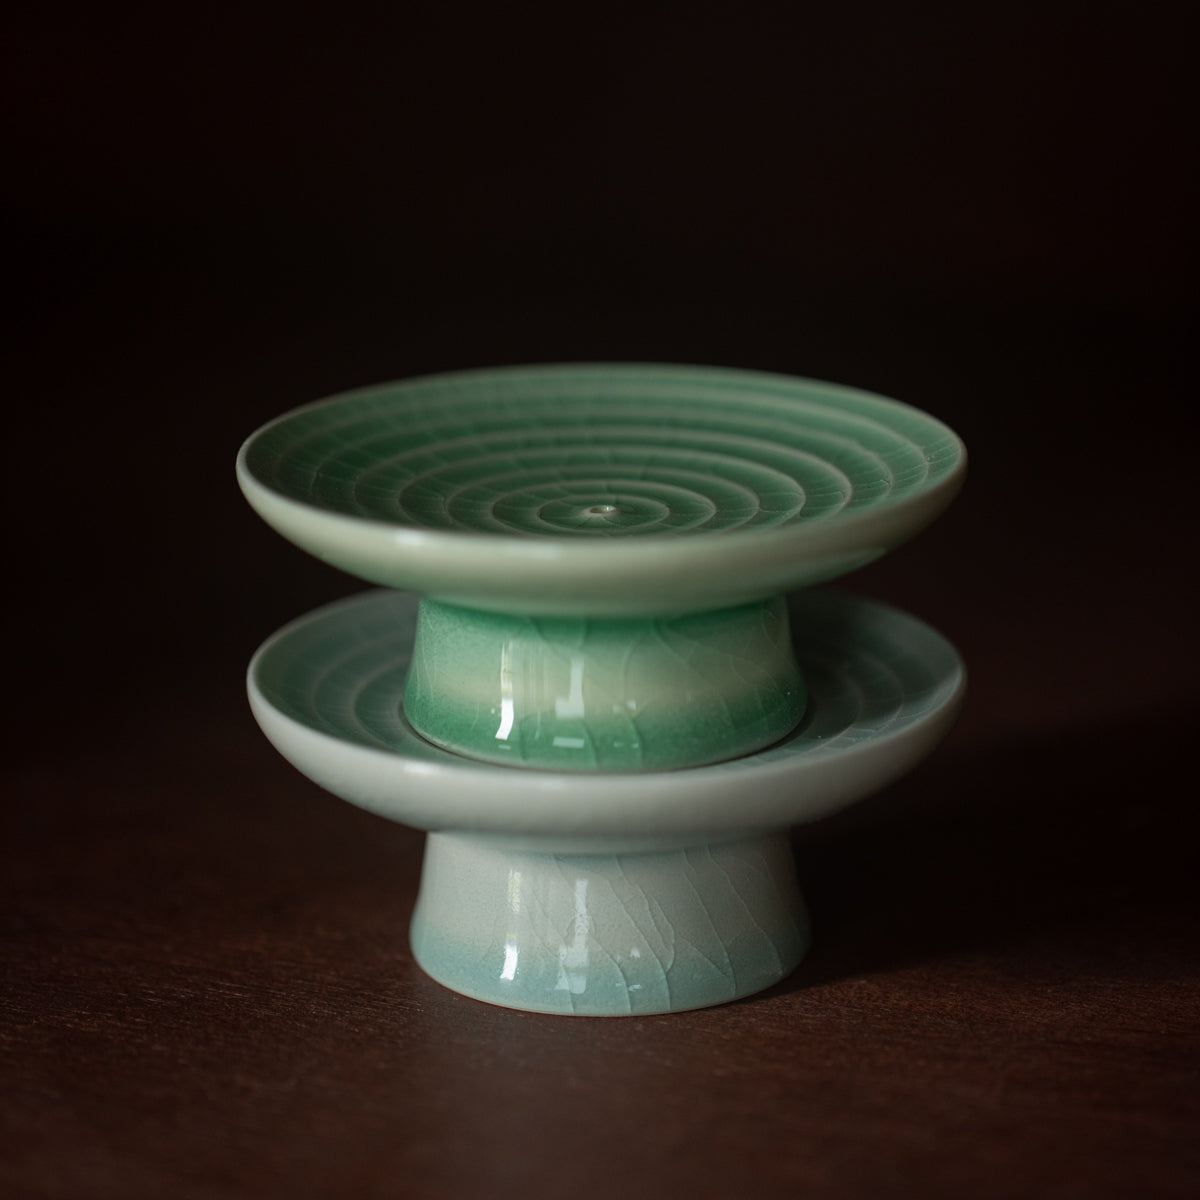 Light-Chungja  Footed Incense Holder